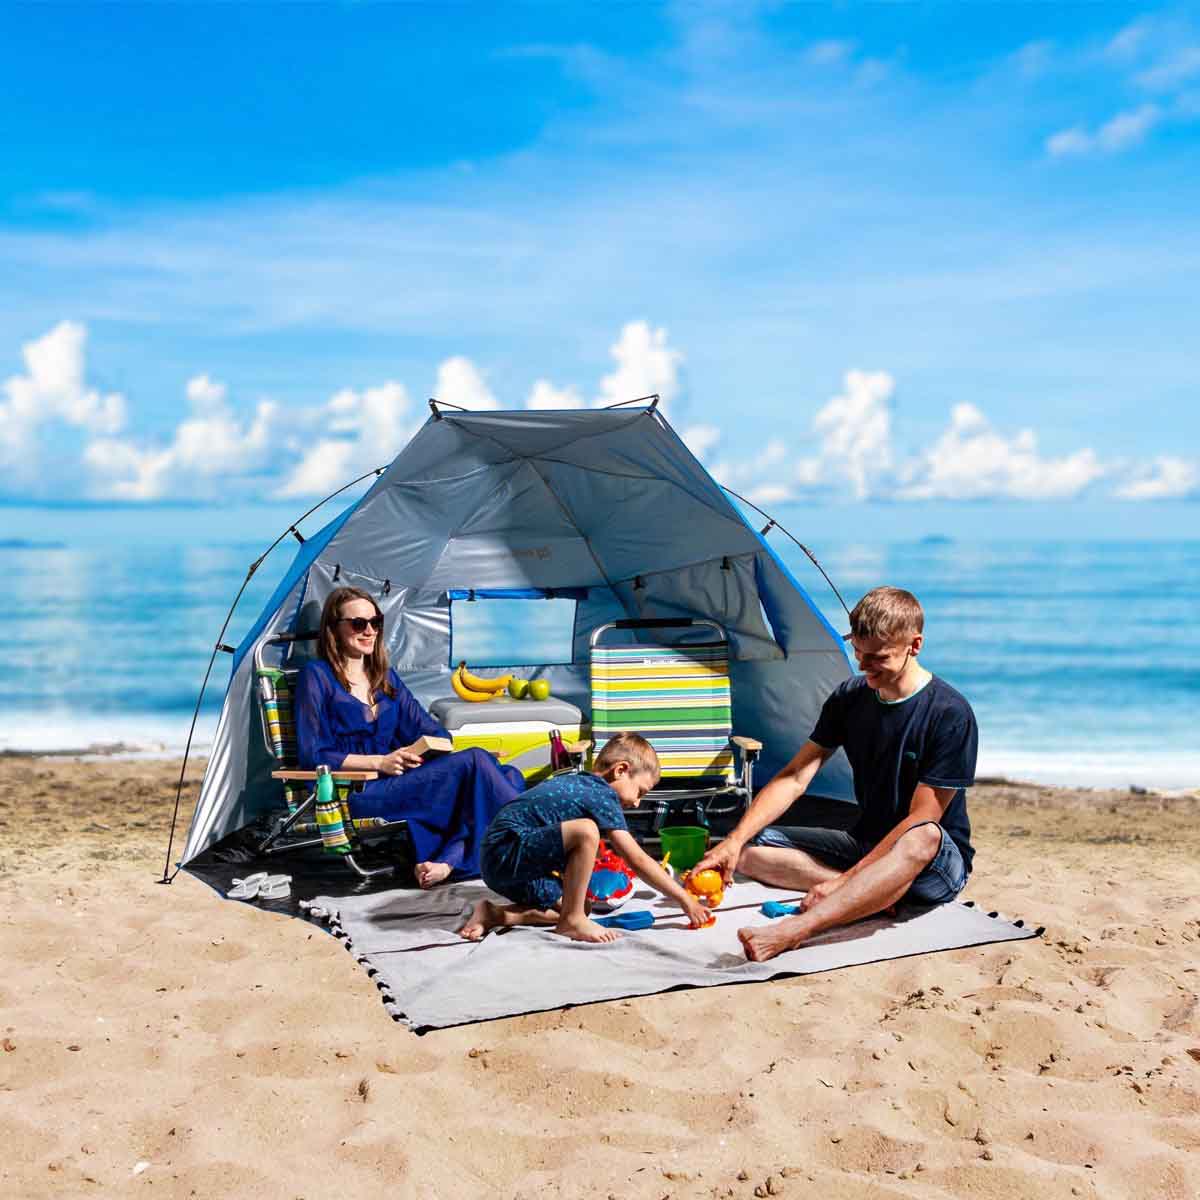 Large Easy Up Beach Tent for 4 Person Sun Shade Shelter UPF 50+